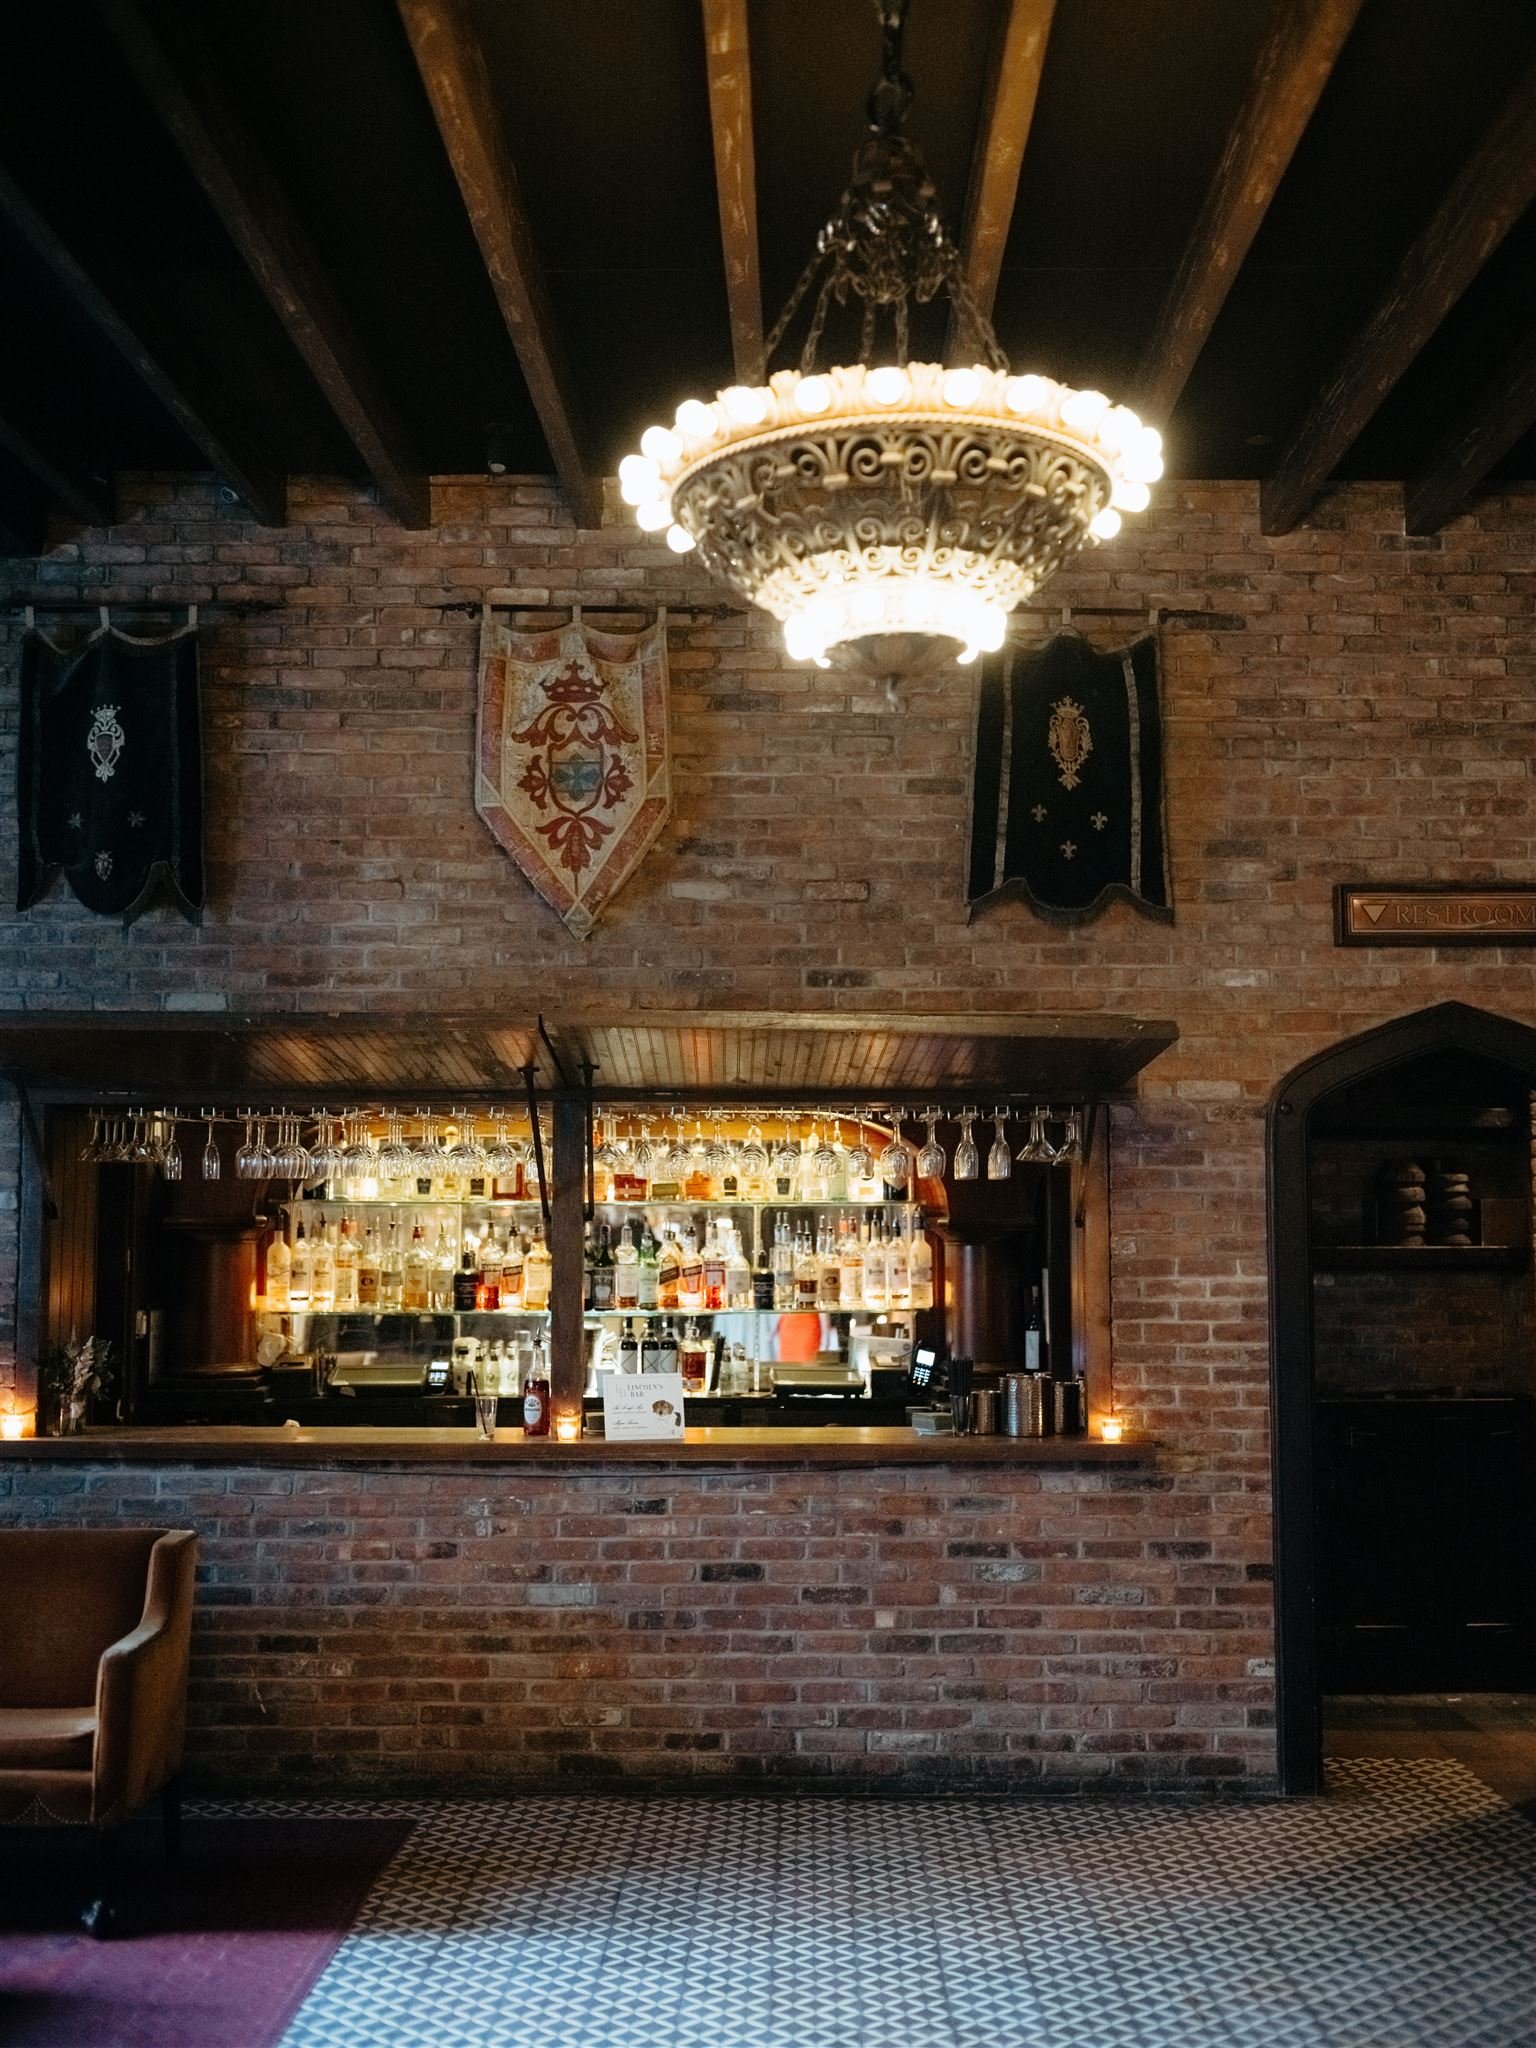 The perfect bar for an Old World wedding design.